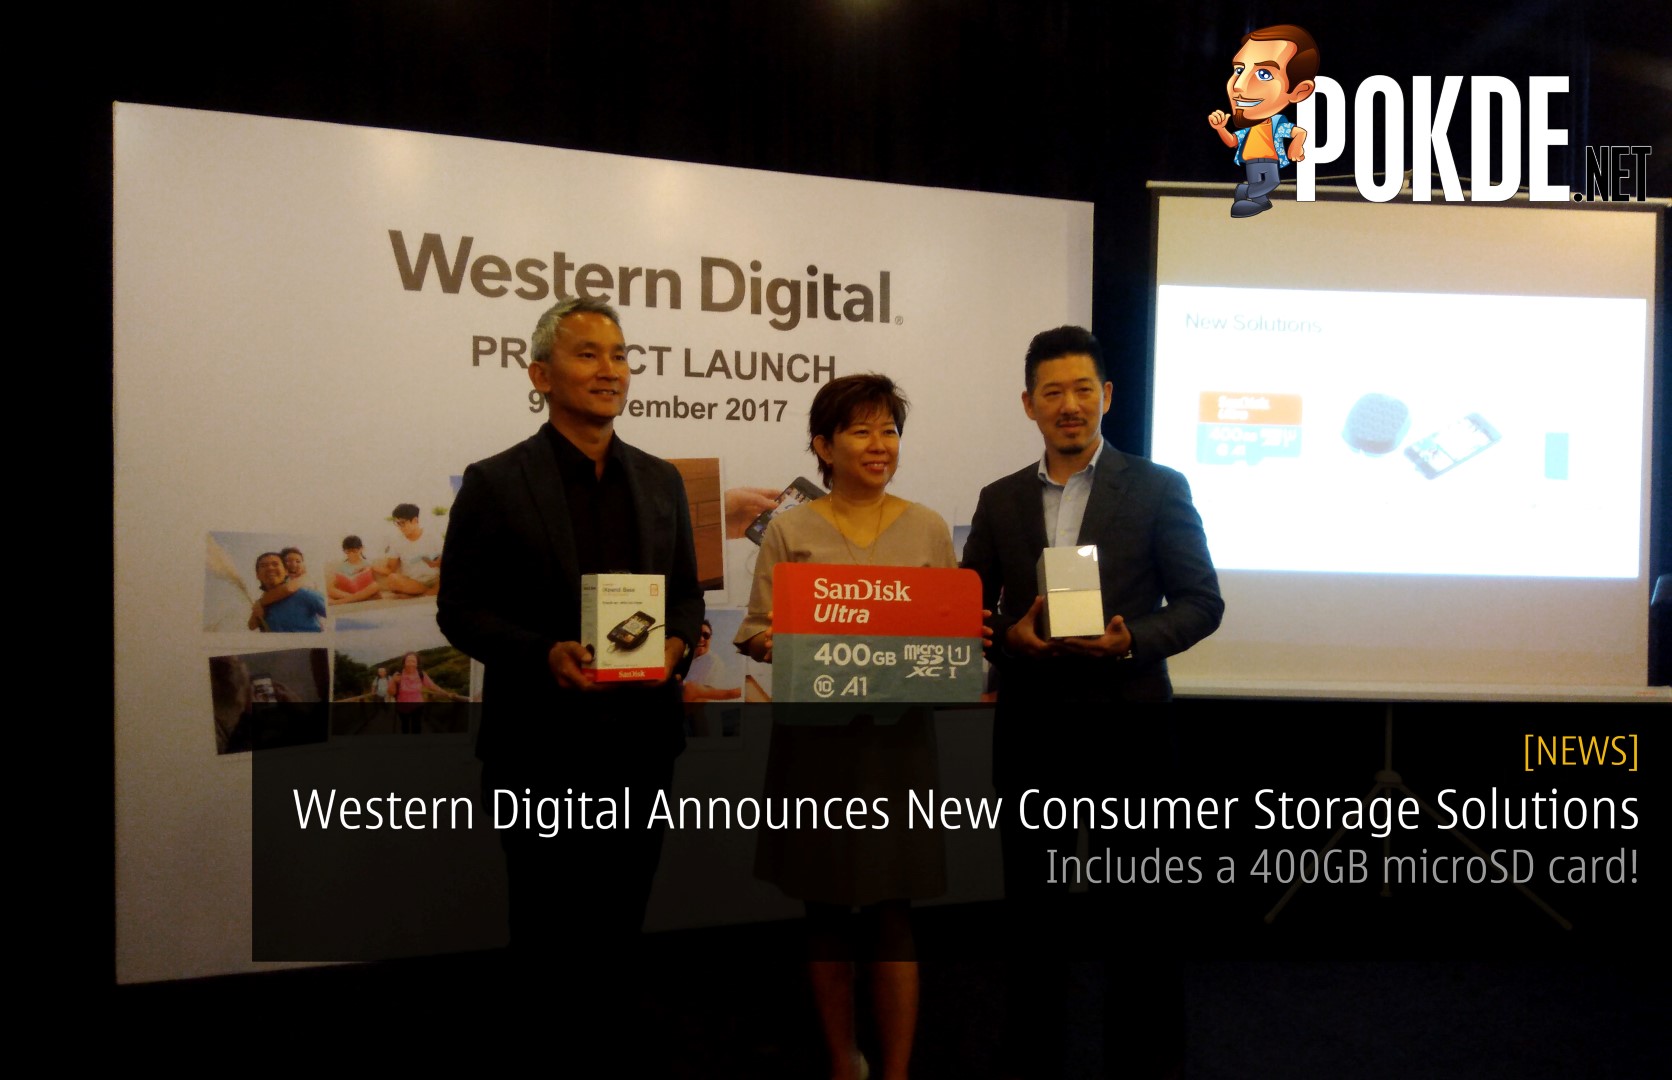 Western Digital Announces New Consumer Storage Solutions - Includes a 400GB microSD card! 29